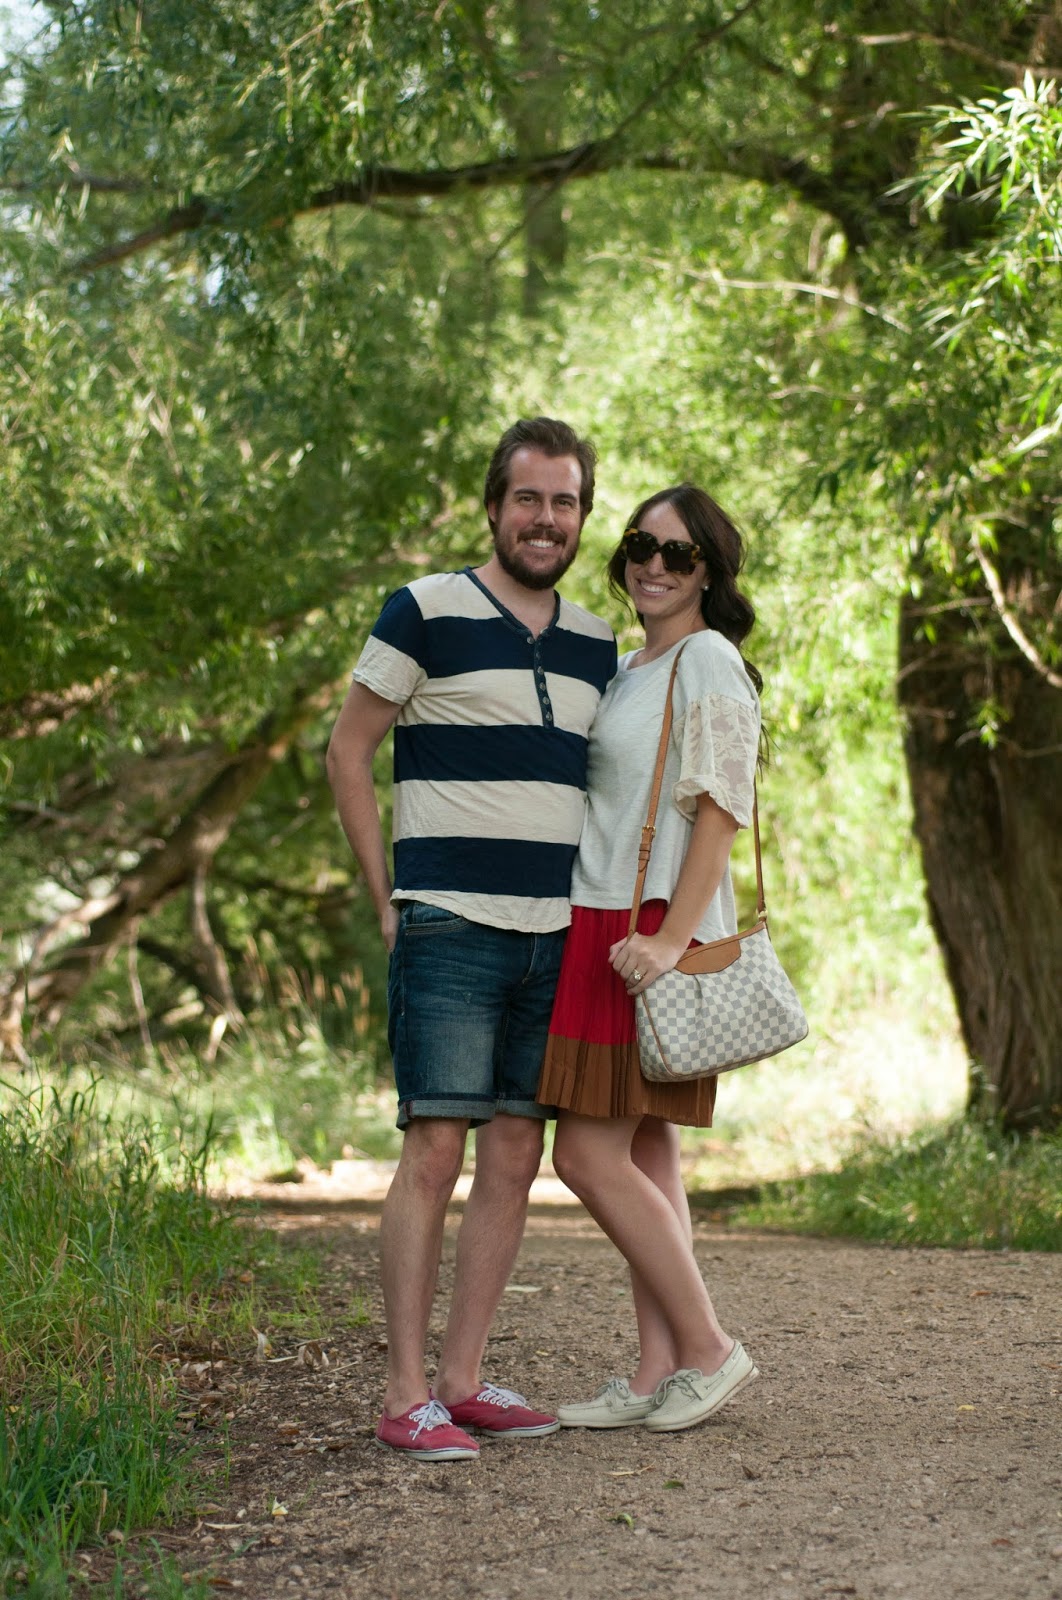 couples style, couples fashion, ootd, couples fashion blog, anthropologie ootd, his and her fashion